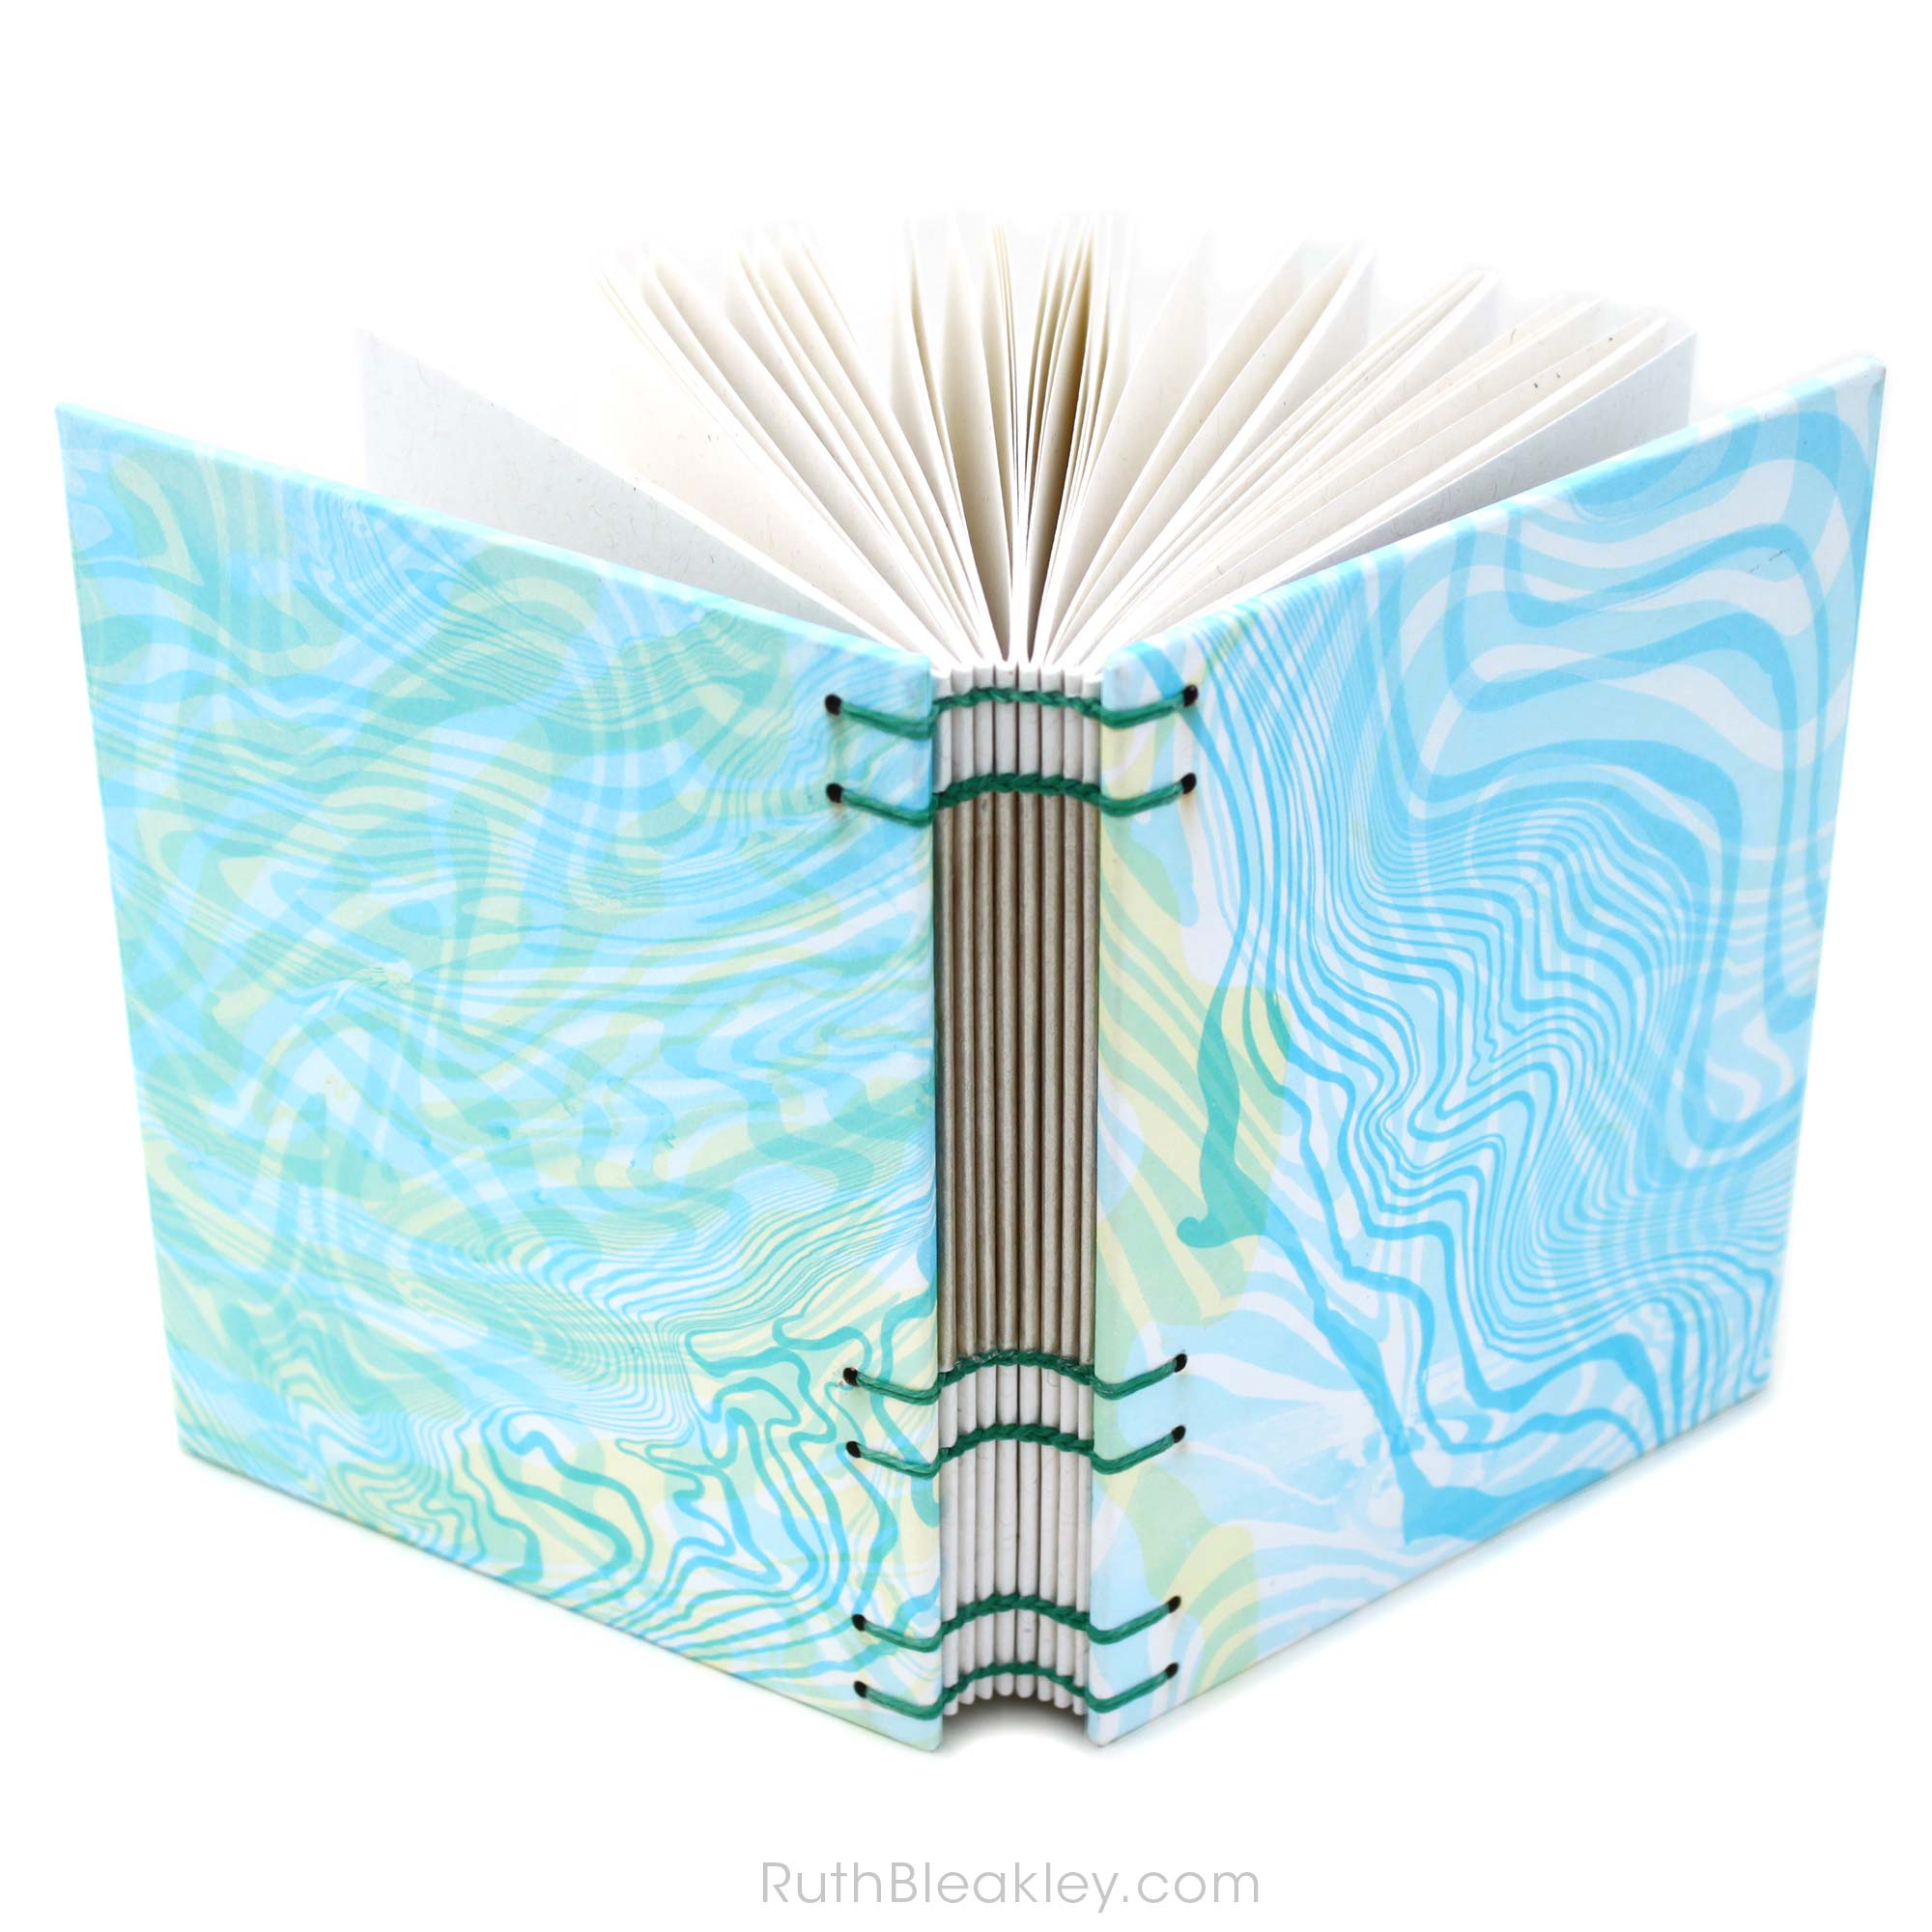 Blue and Yellow Suminagashi Journal by Ruth Bleakley 2